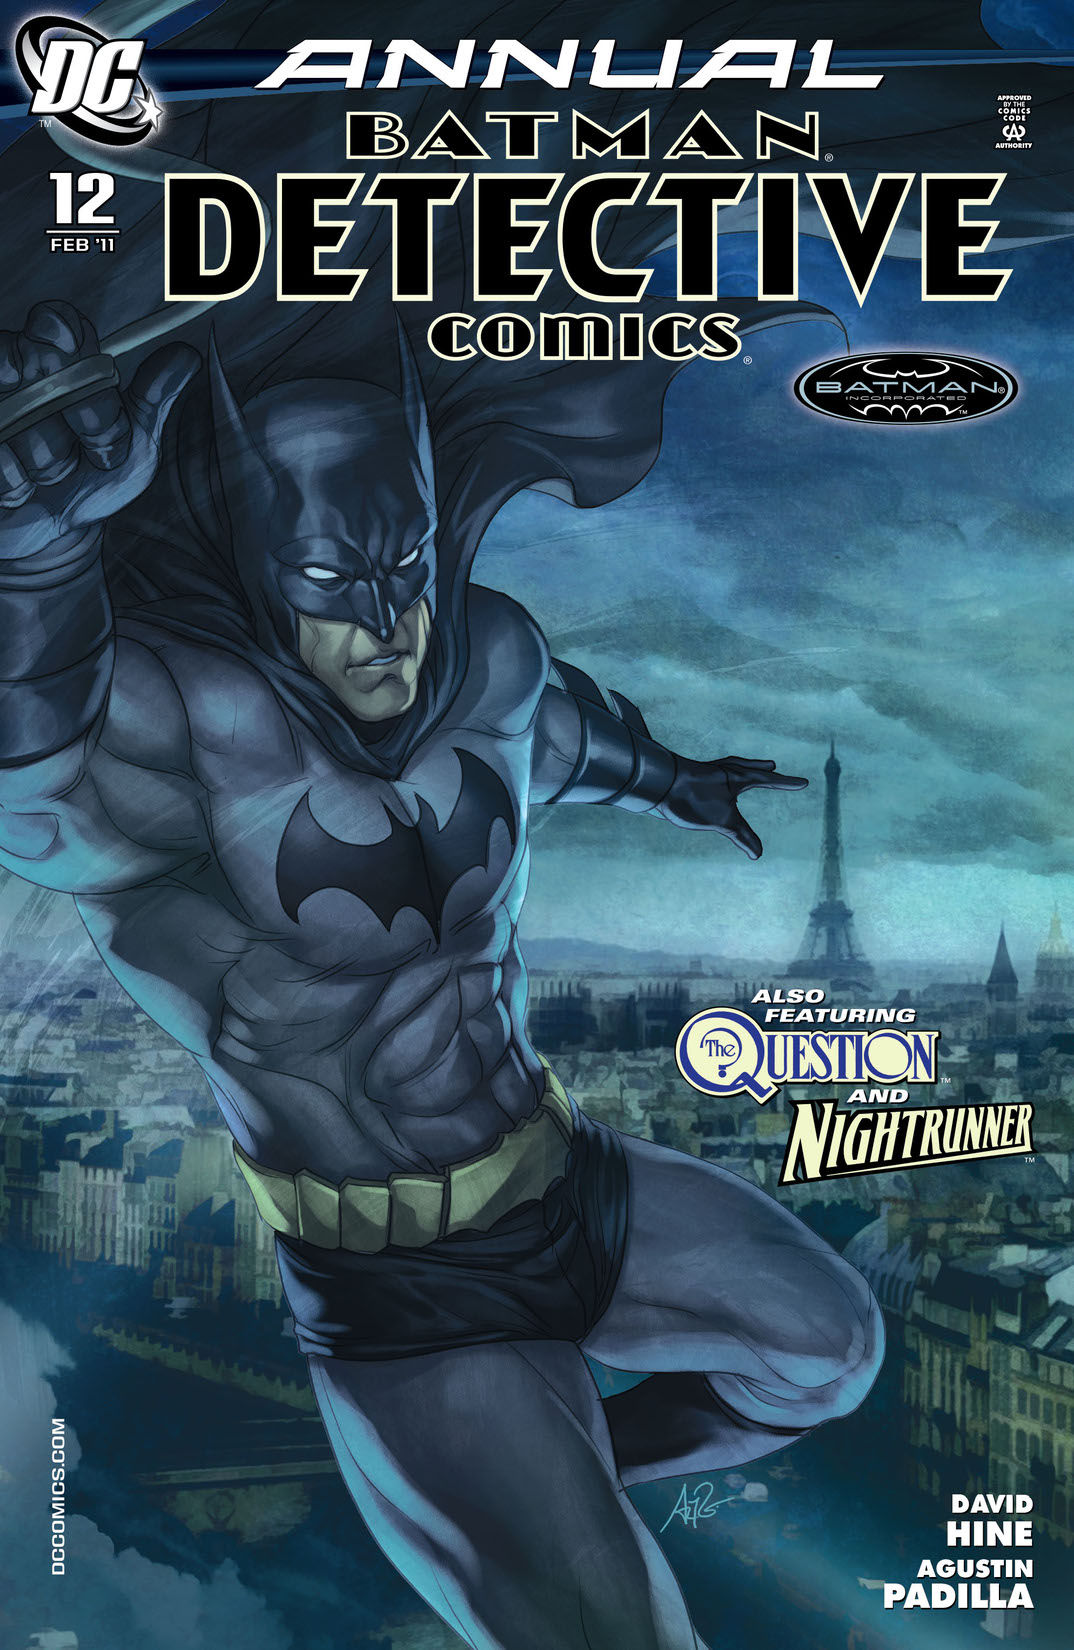 Detective Comics Annual (1988-) #12 preview images